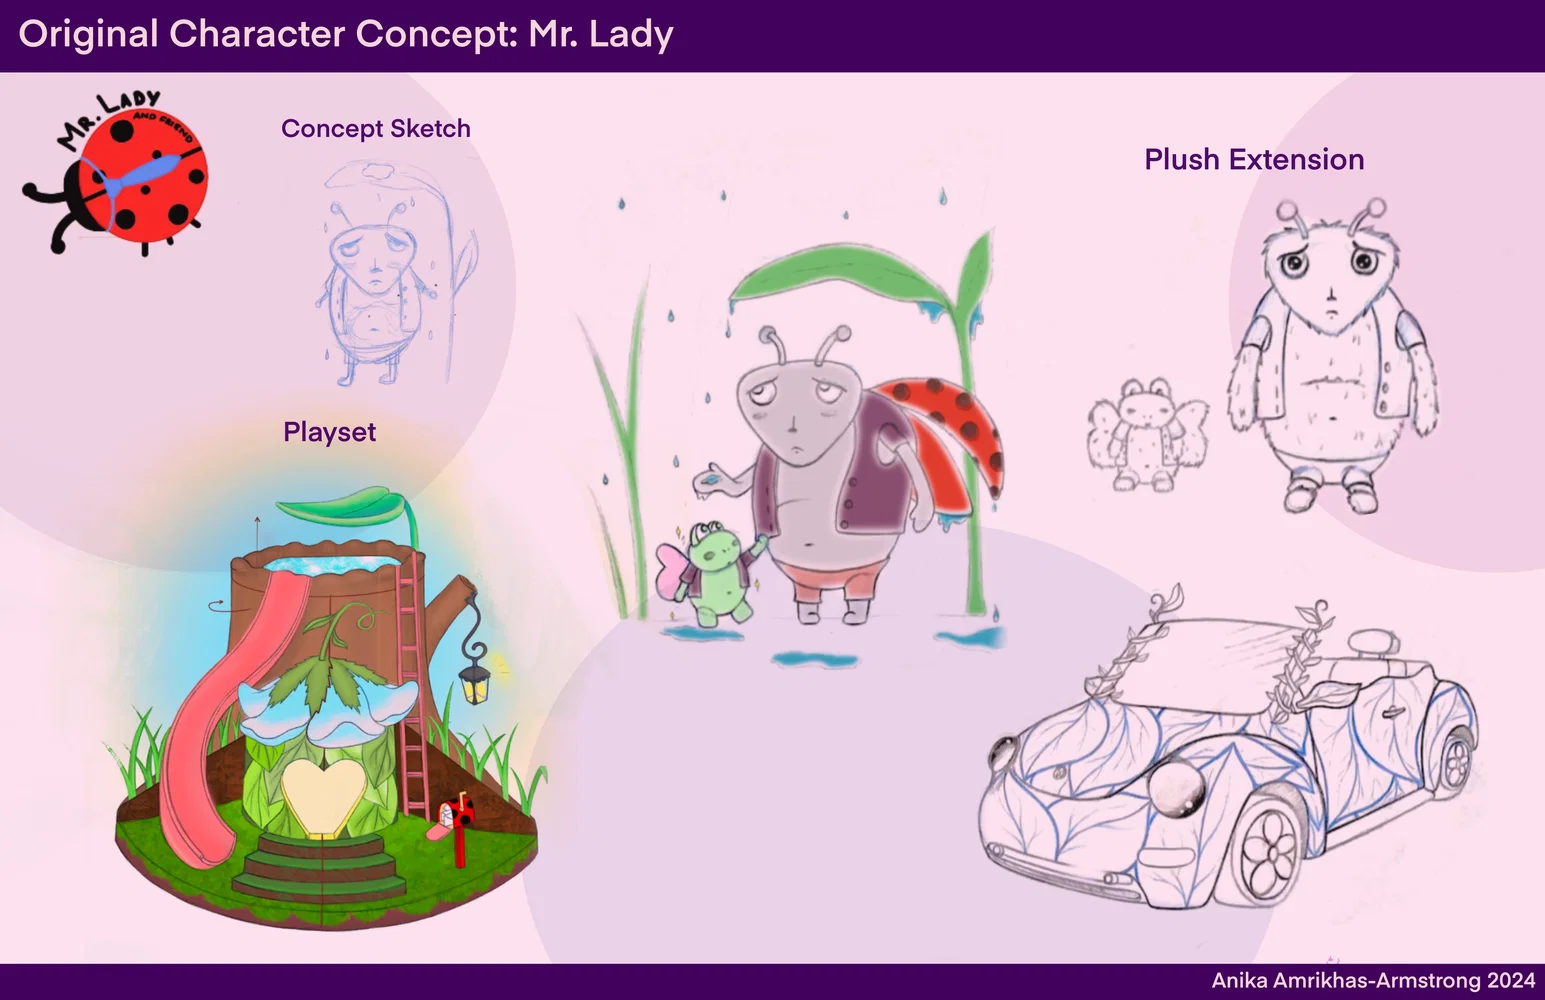 Mr. Lady and Friend is an original toy concept that features plush, a playlet, character design, and car concept. It focuses on the main character 'Mr. Lady' the ladybug and his friend the frog